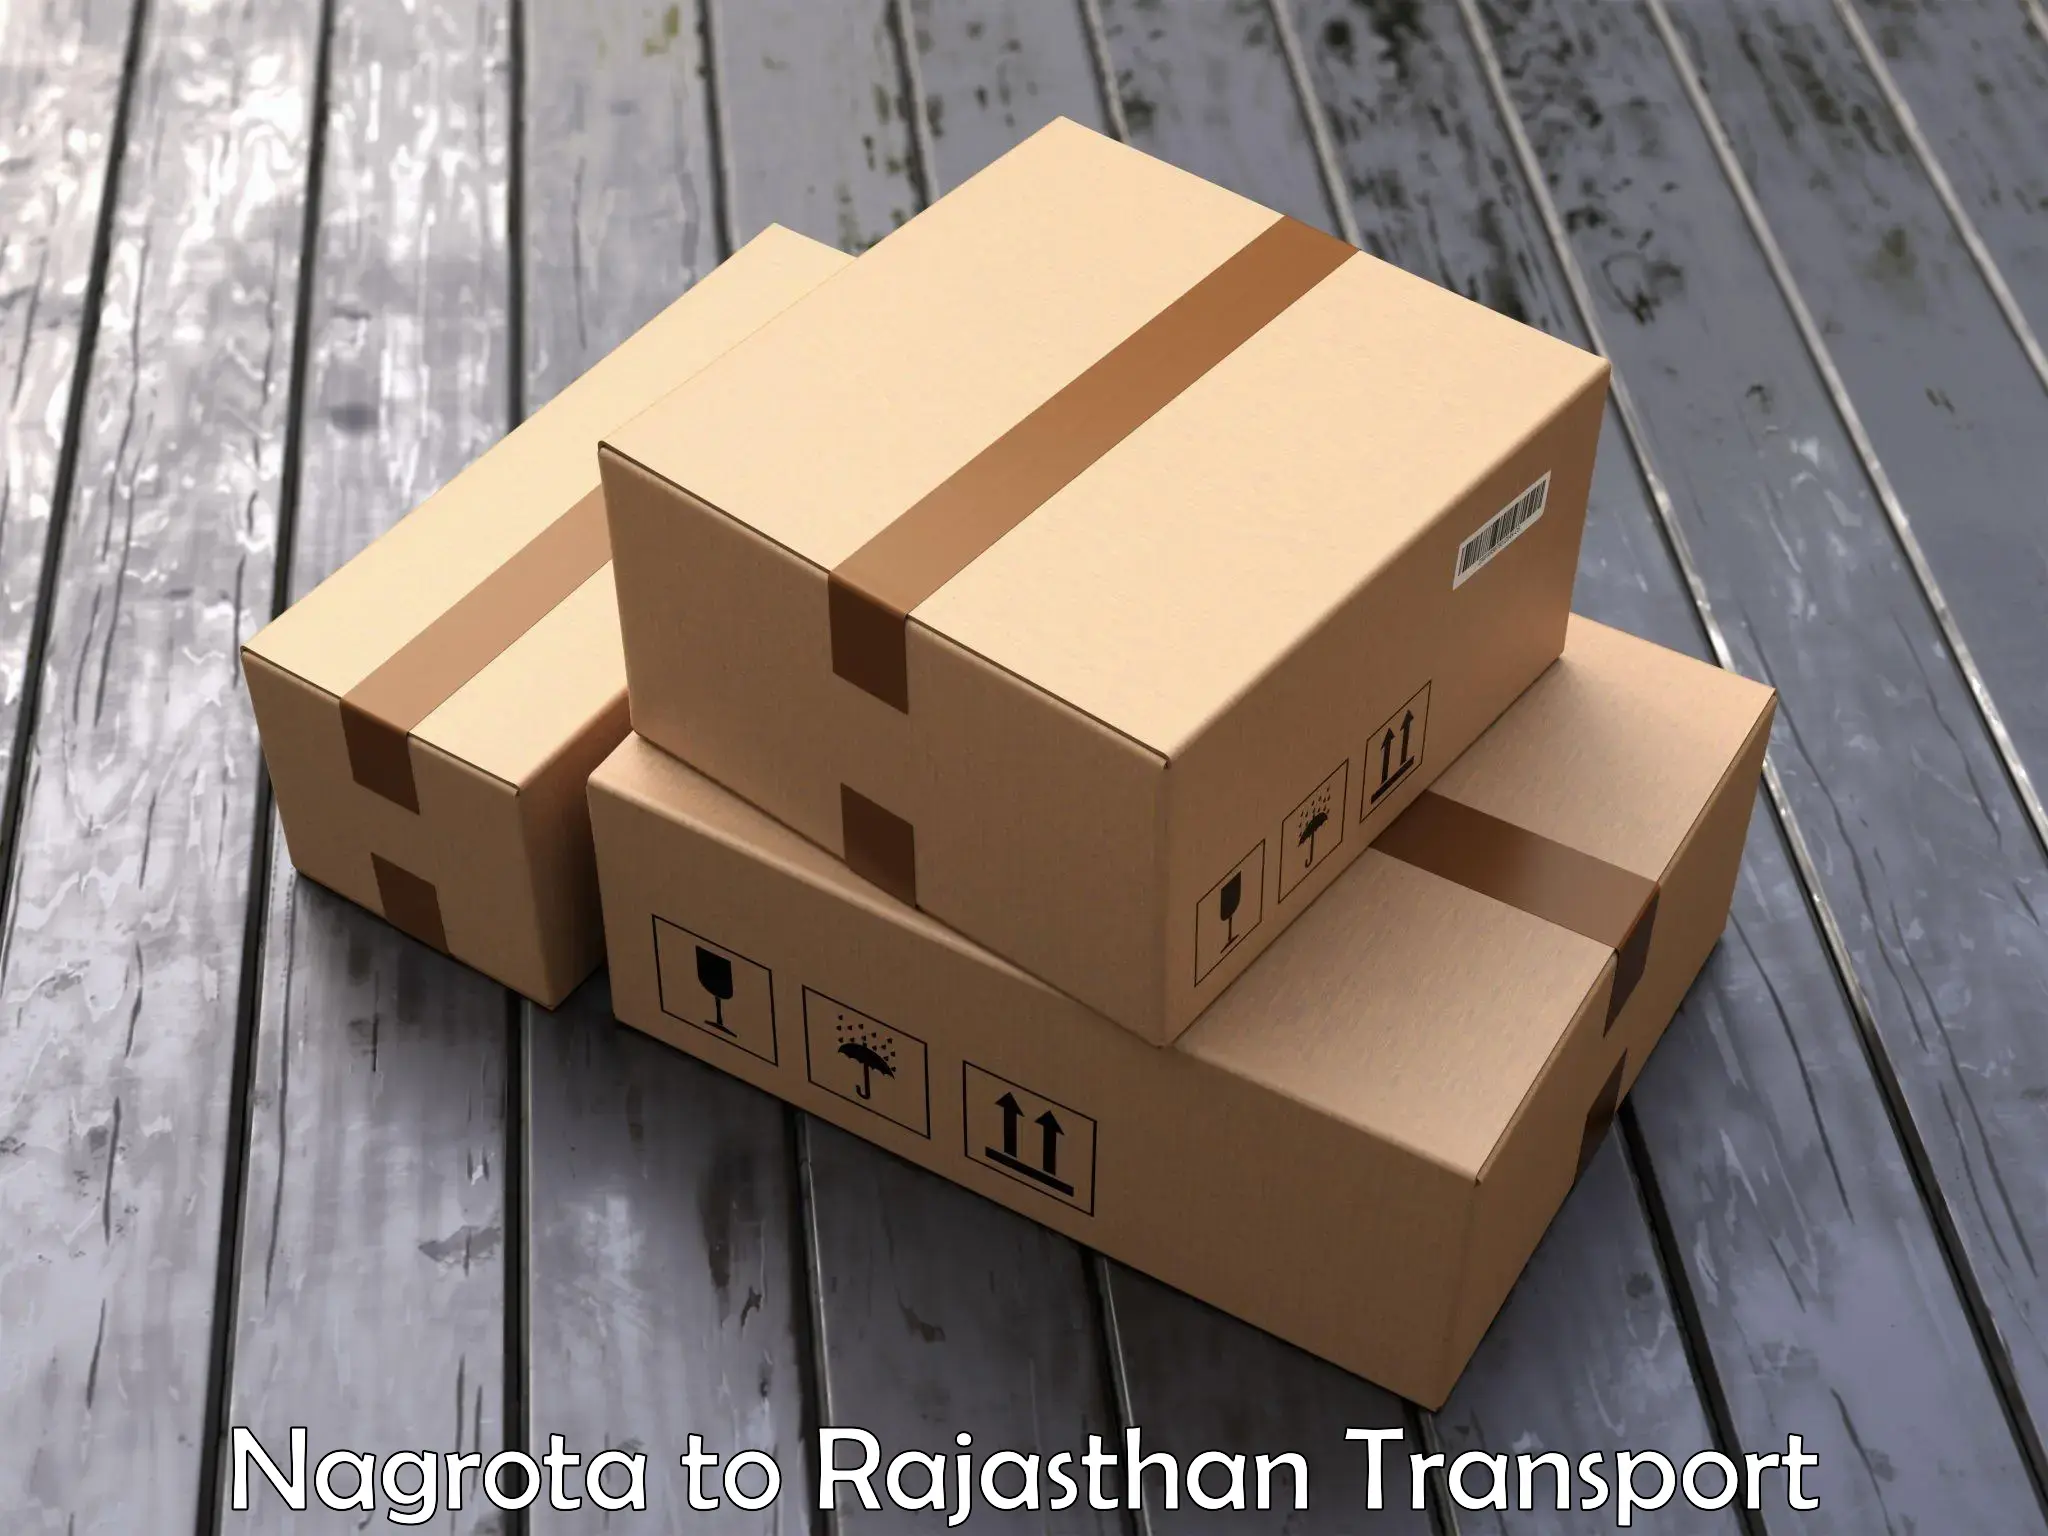 Commercial transport service Nagrota to Rajasthan